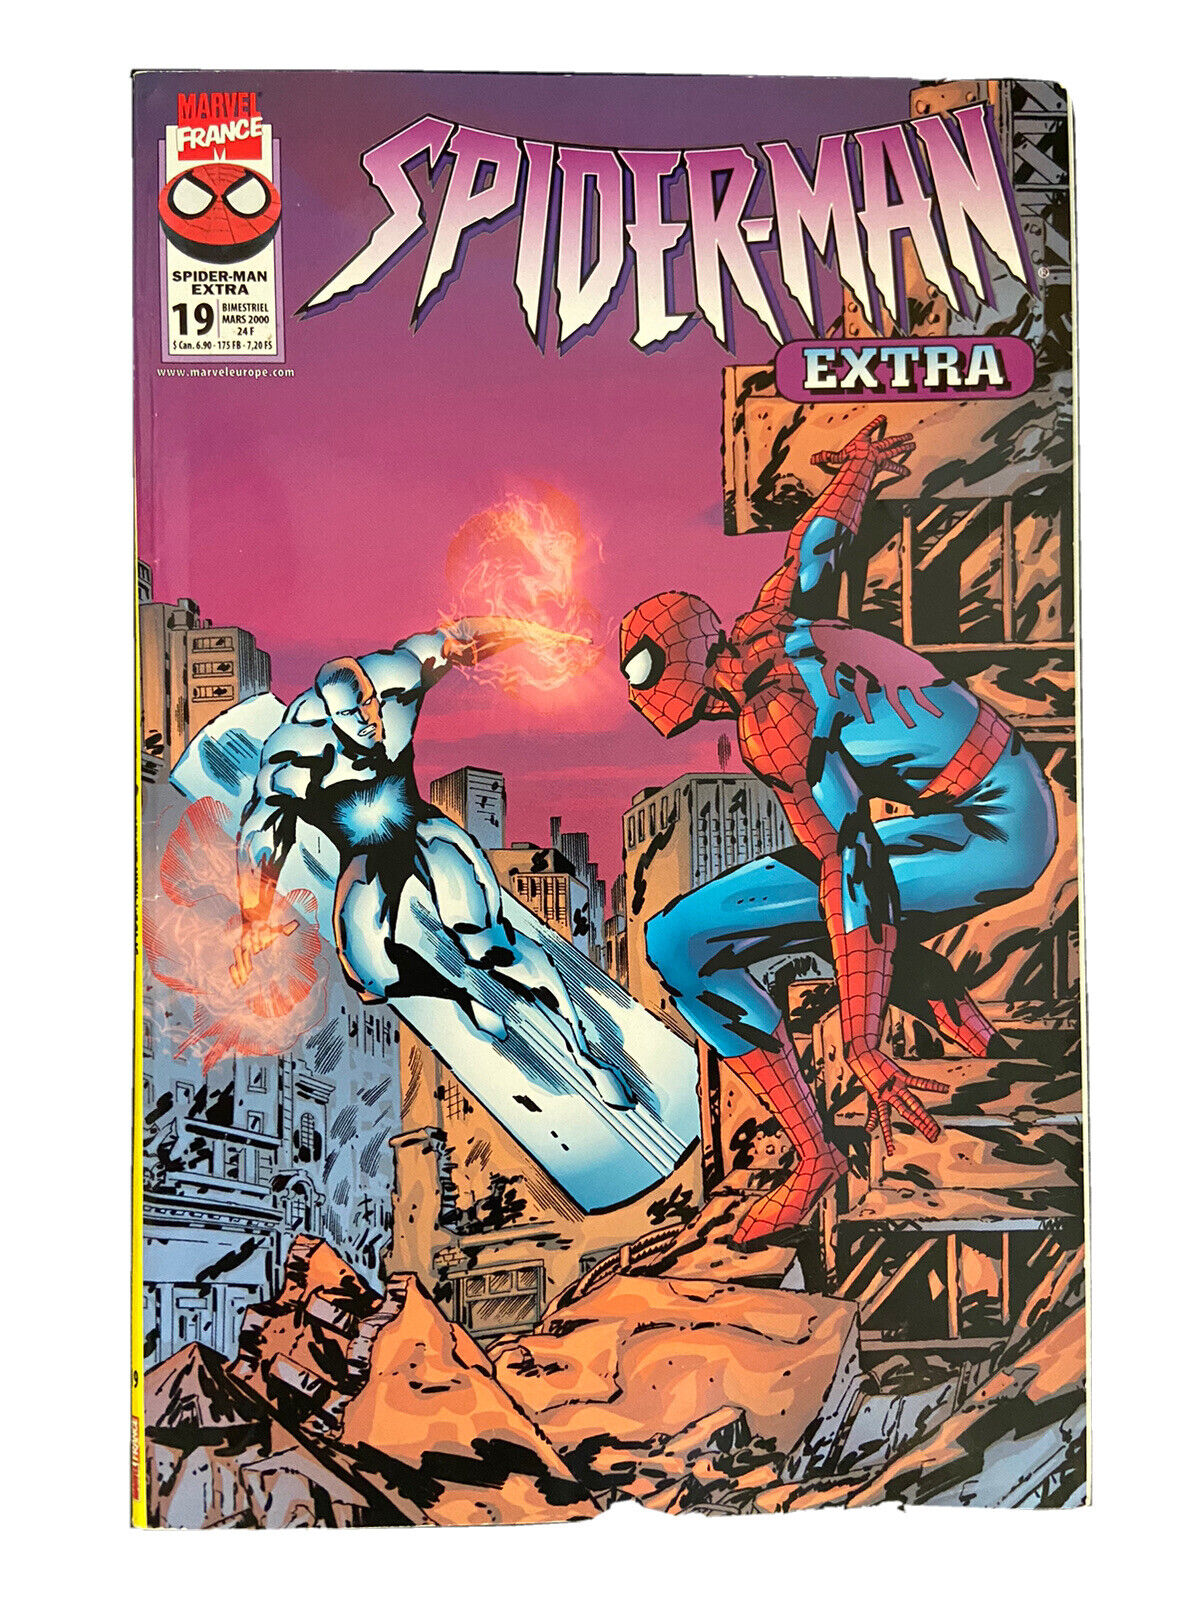 Spider-Man Extra 19 (2000) French Edition